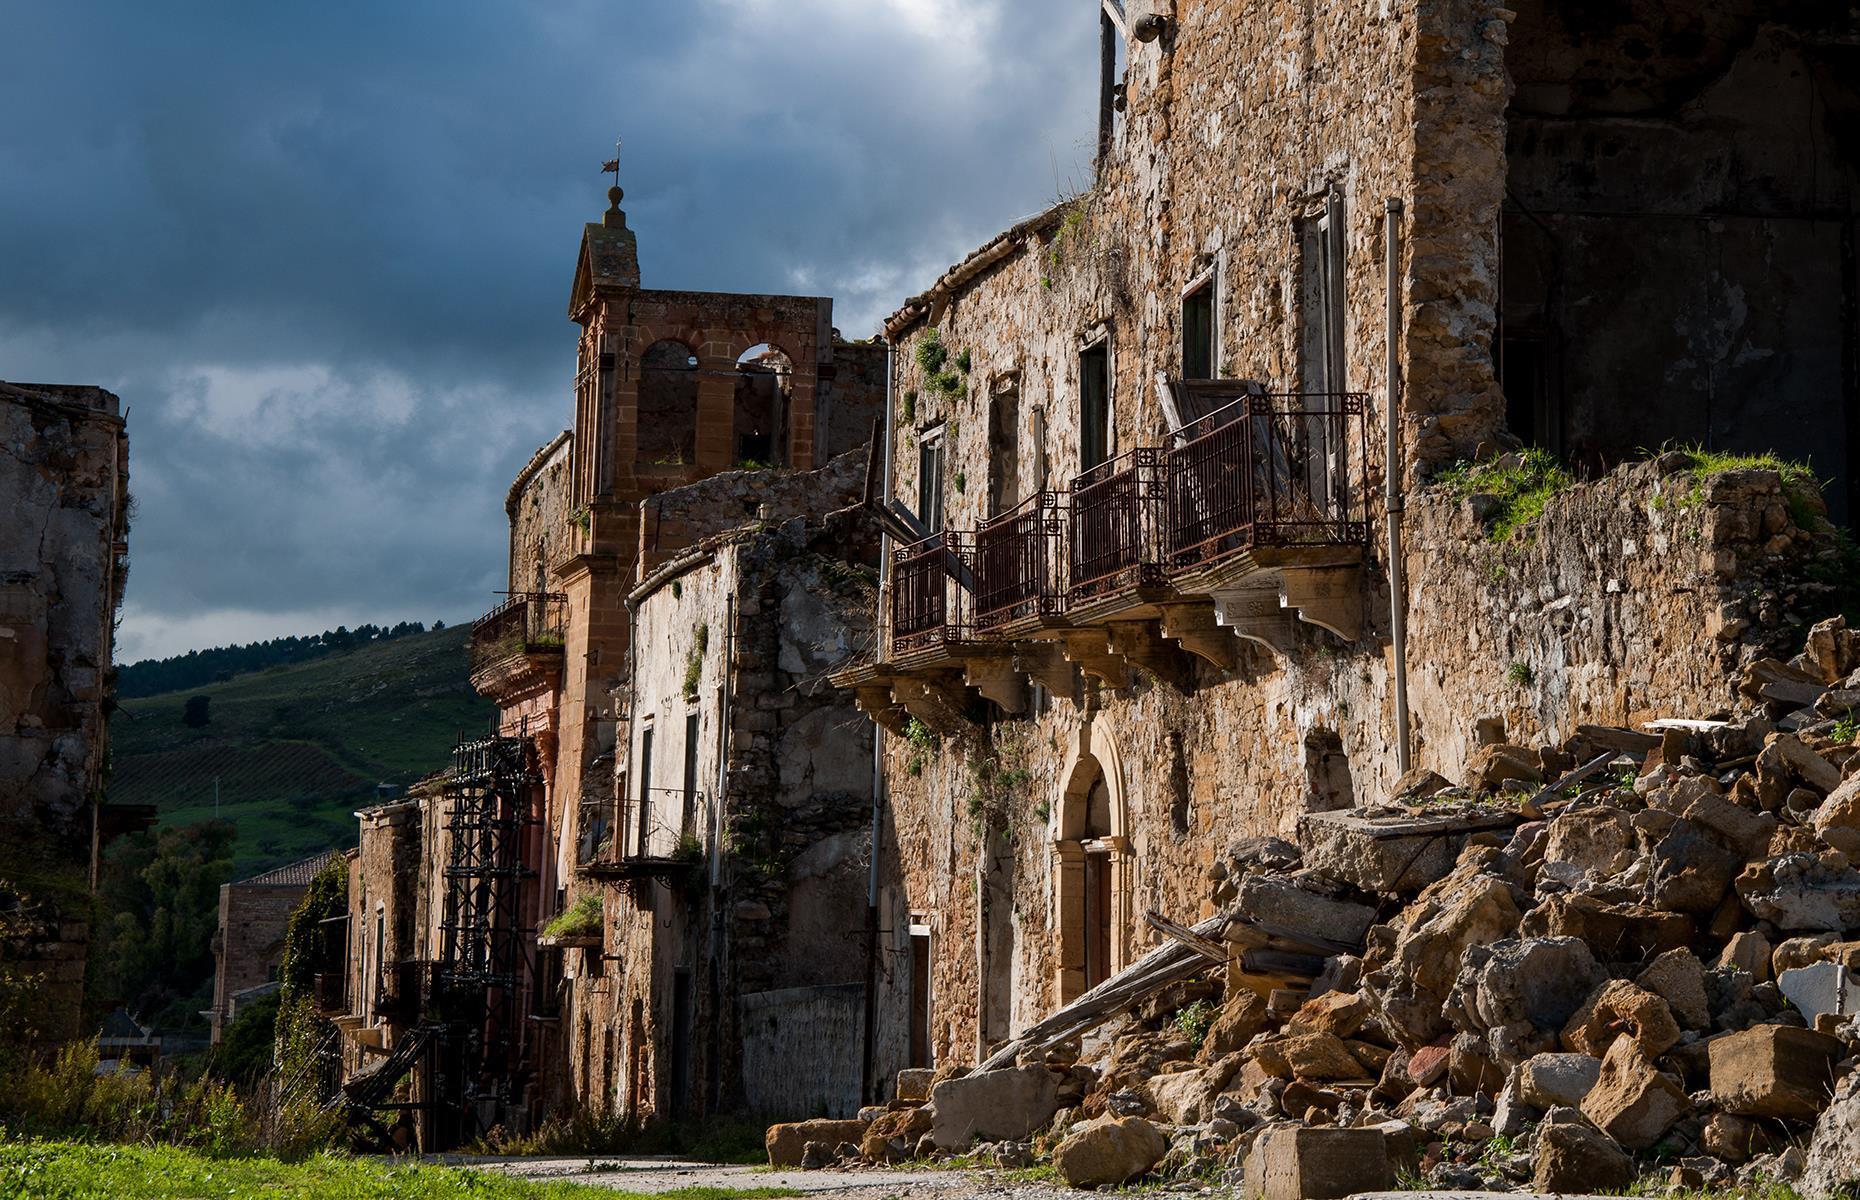 A crumbling ghost town ravaged by earthquakes, Italy